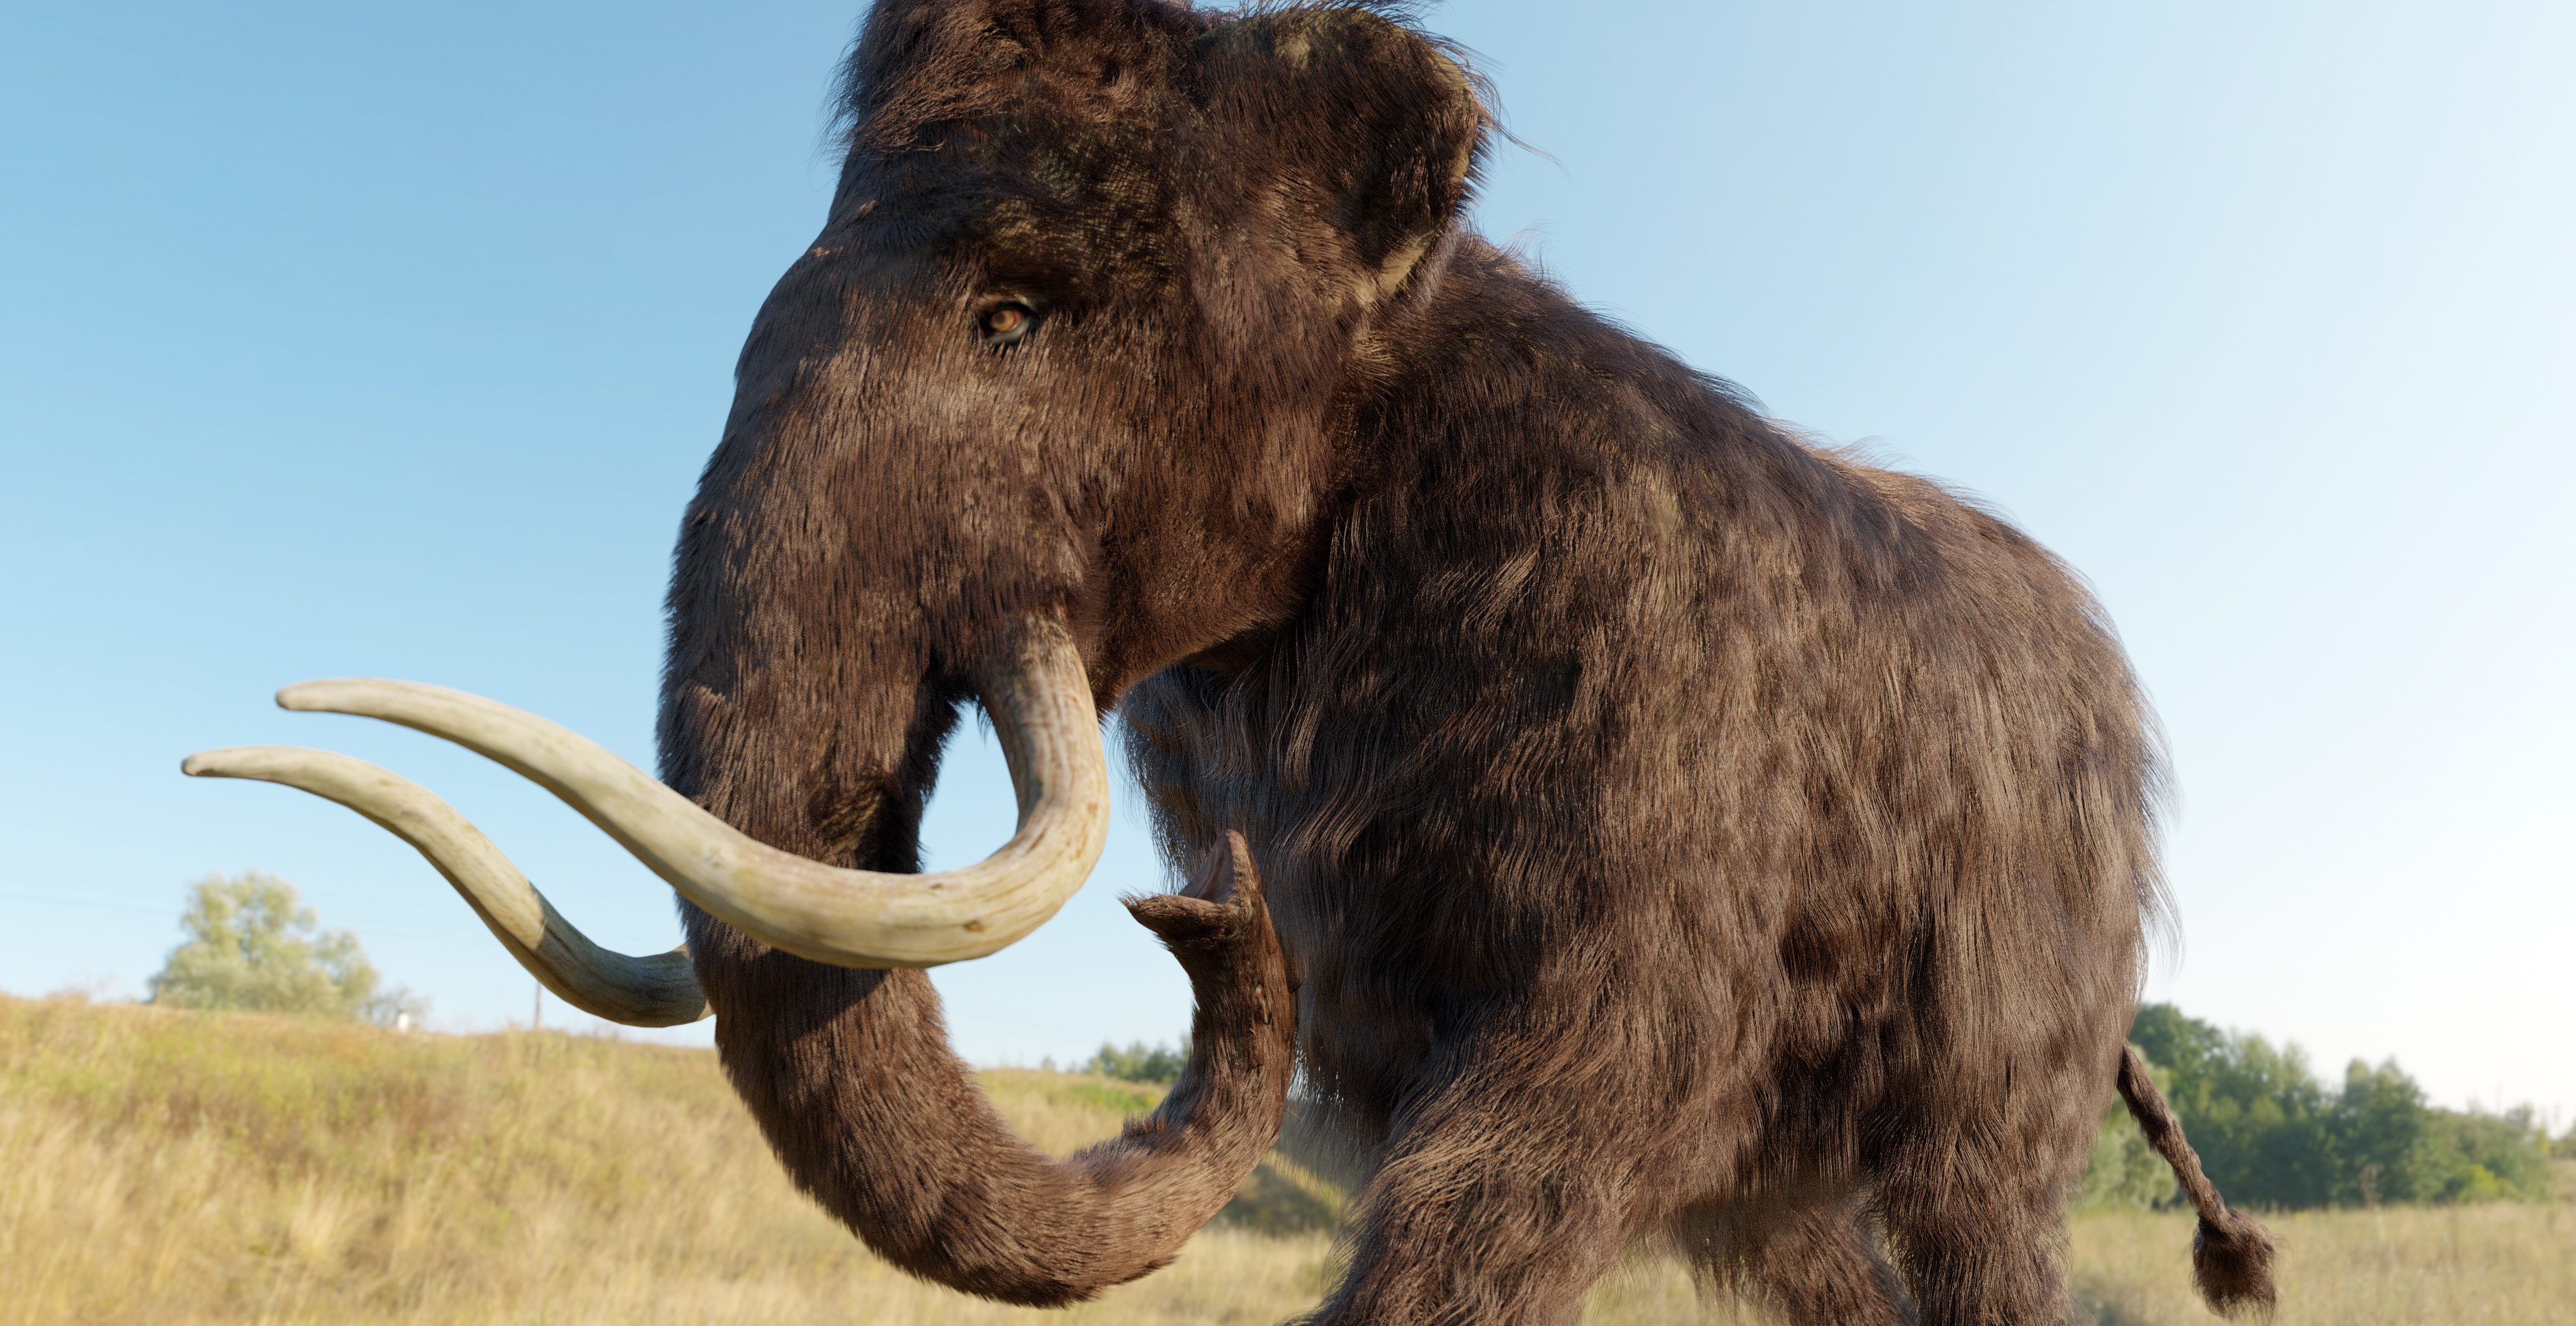 A 3D illustration of a Woolly Mammoth walking across a grassy field.